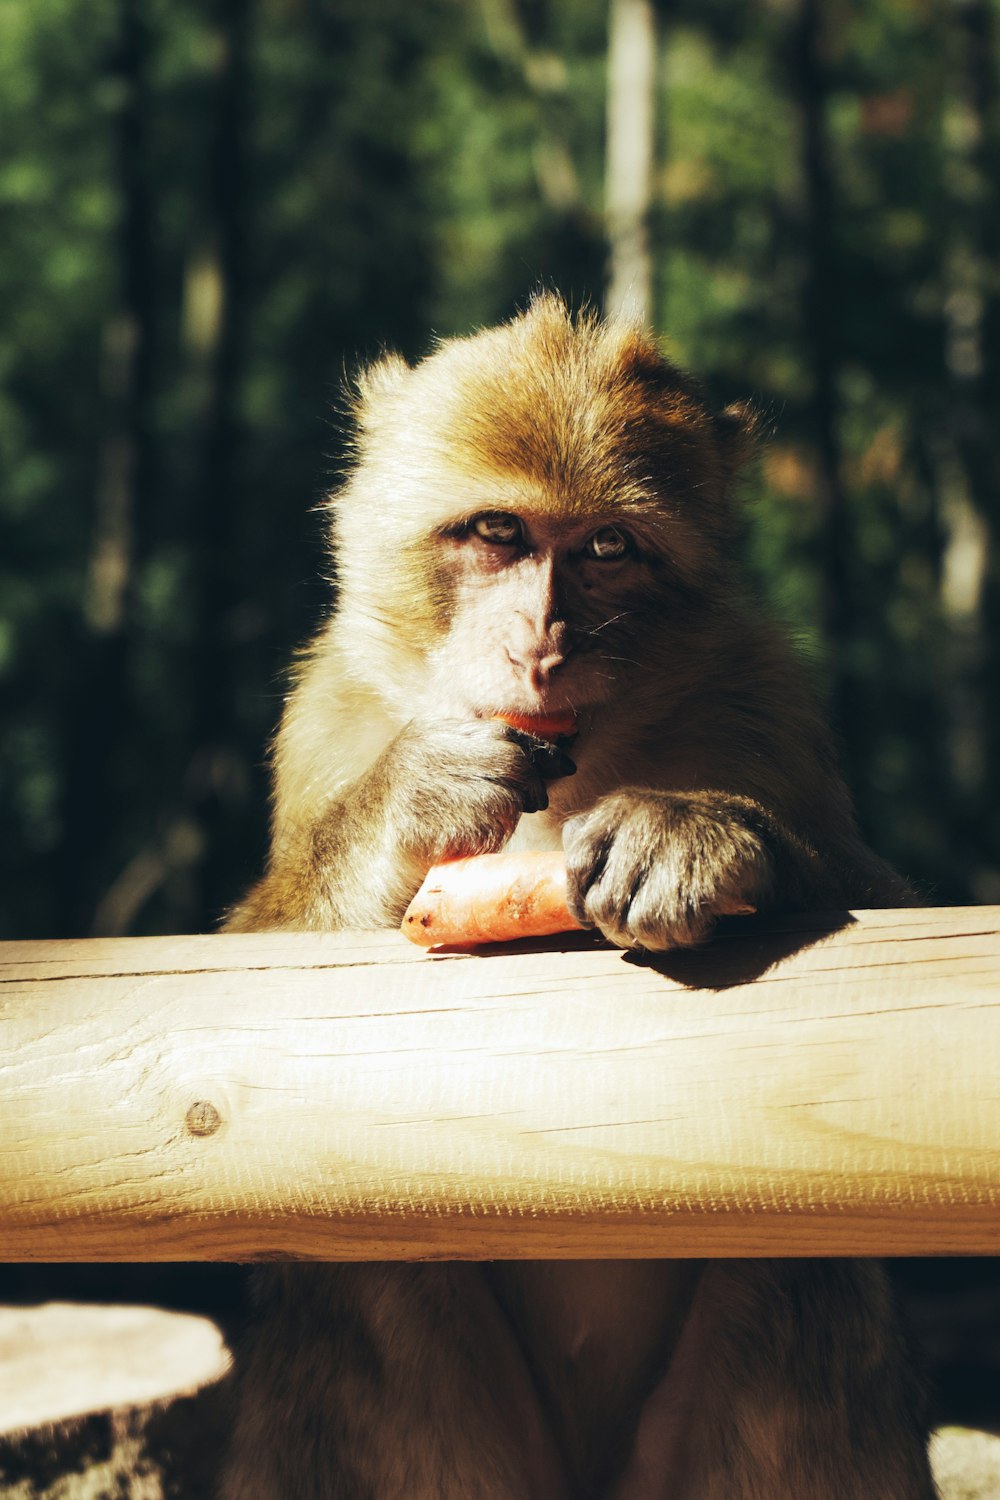 brown monkey sitting on brown wooden table during daytime